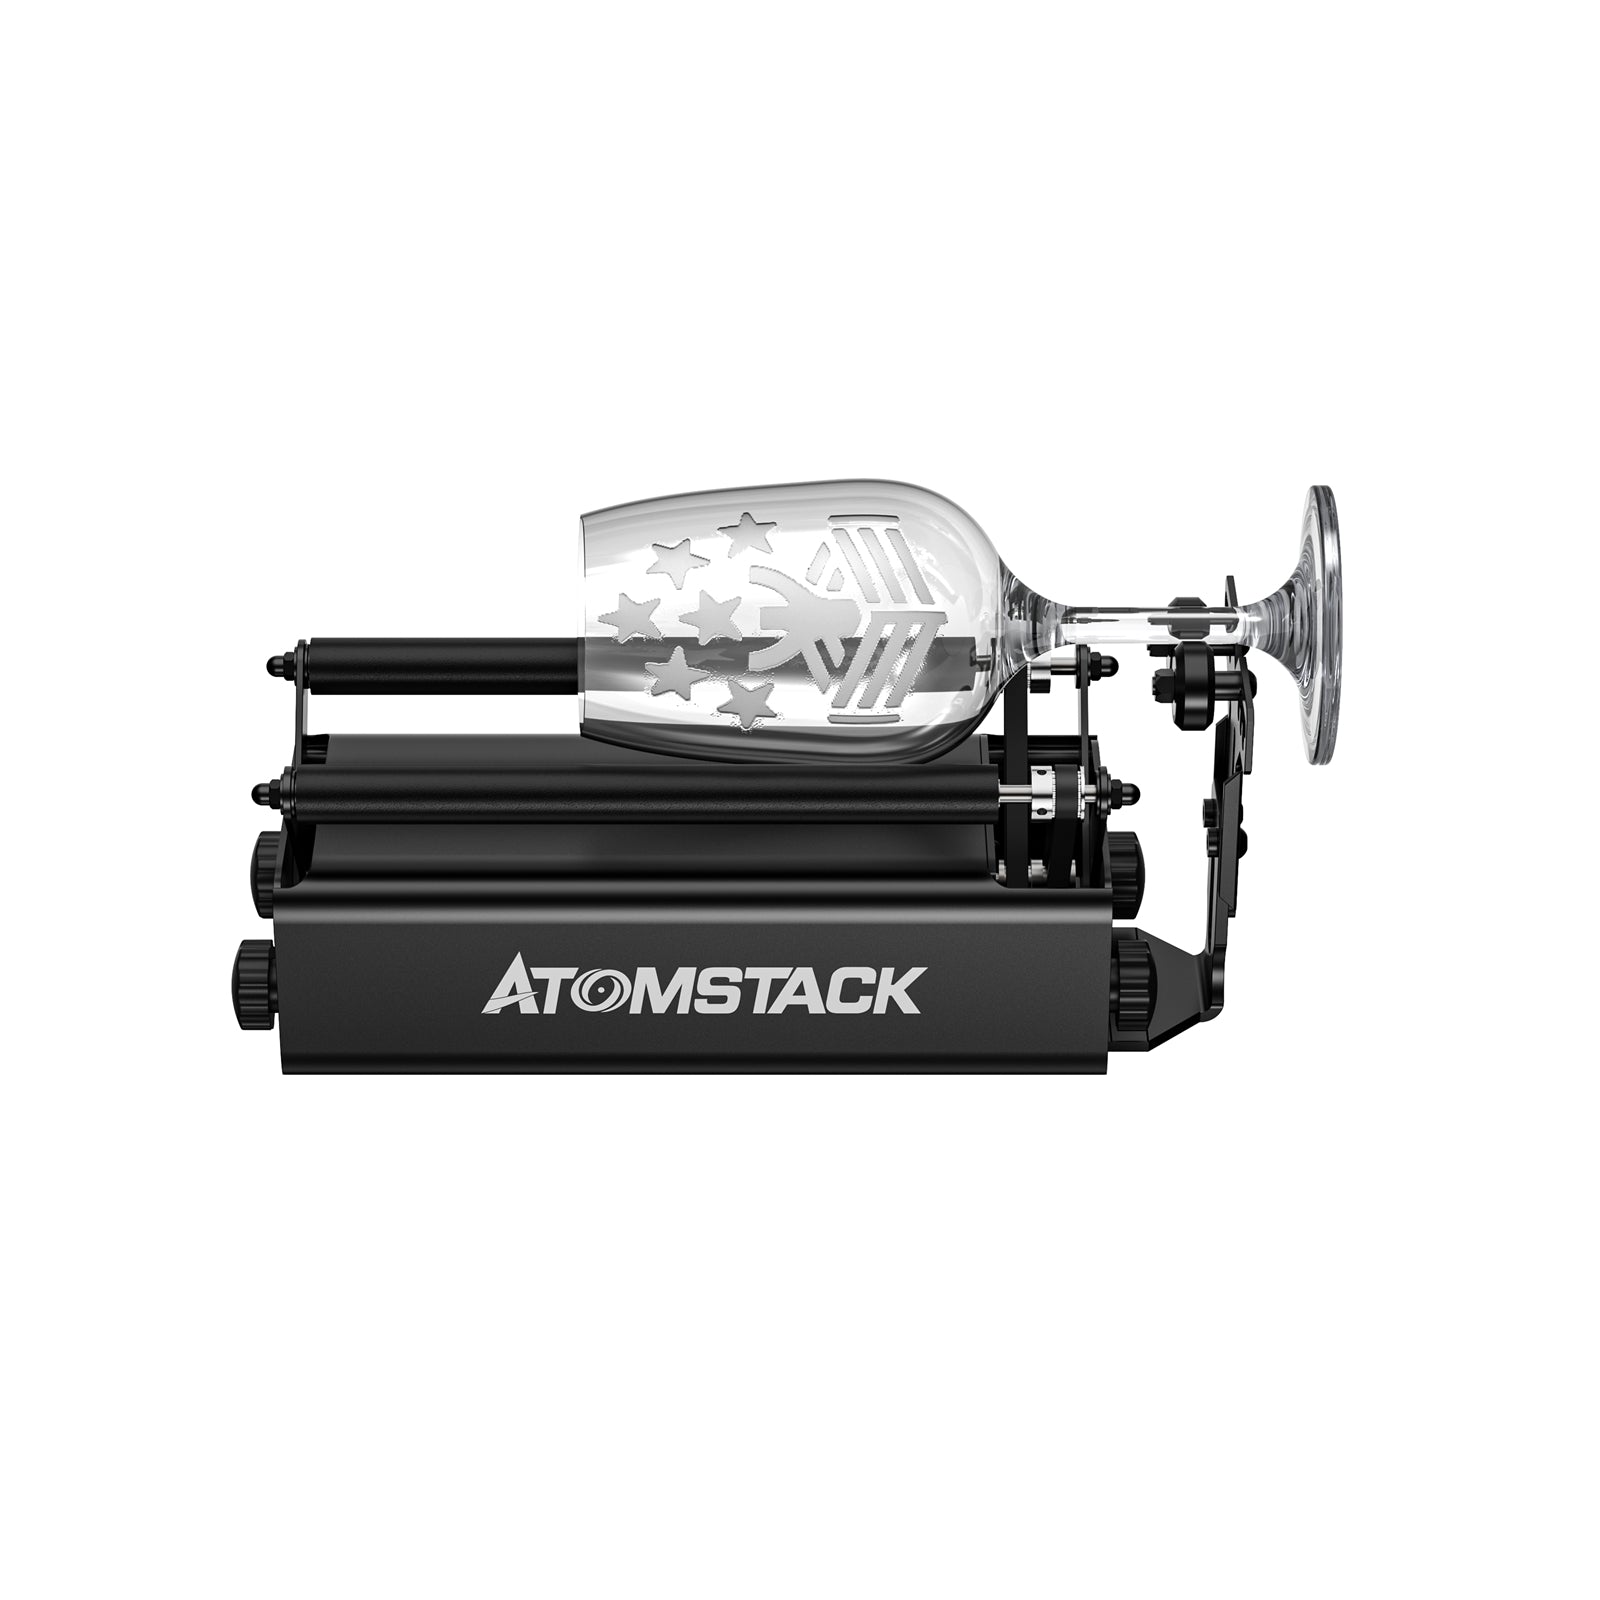 Upgraded Atomstack R3 Pro Rotary Roller with Separable support module and Extension Towers